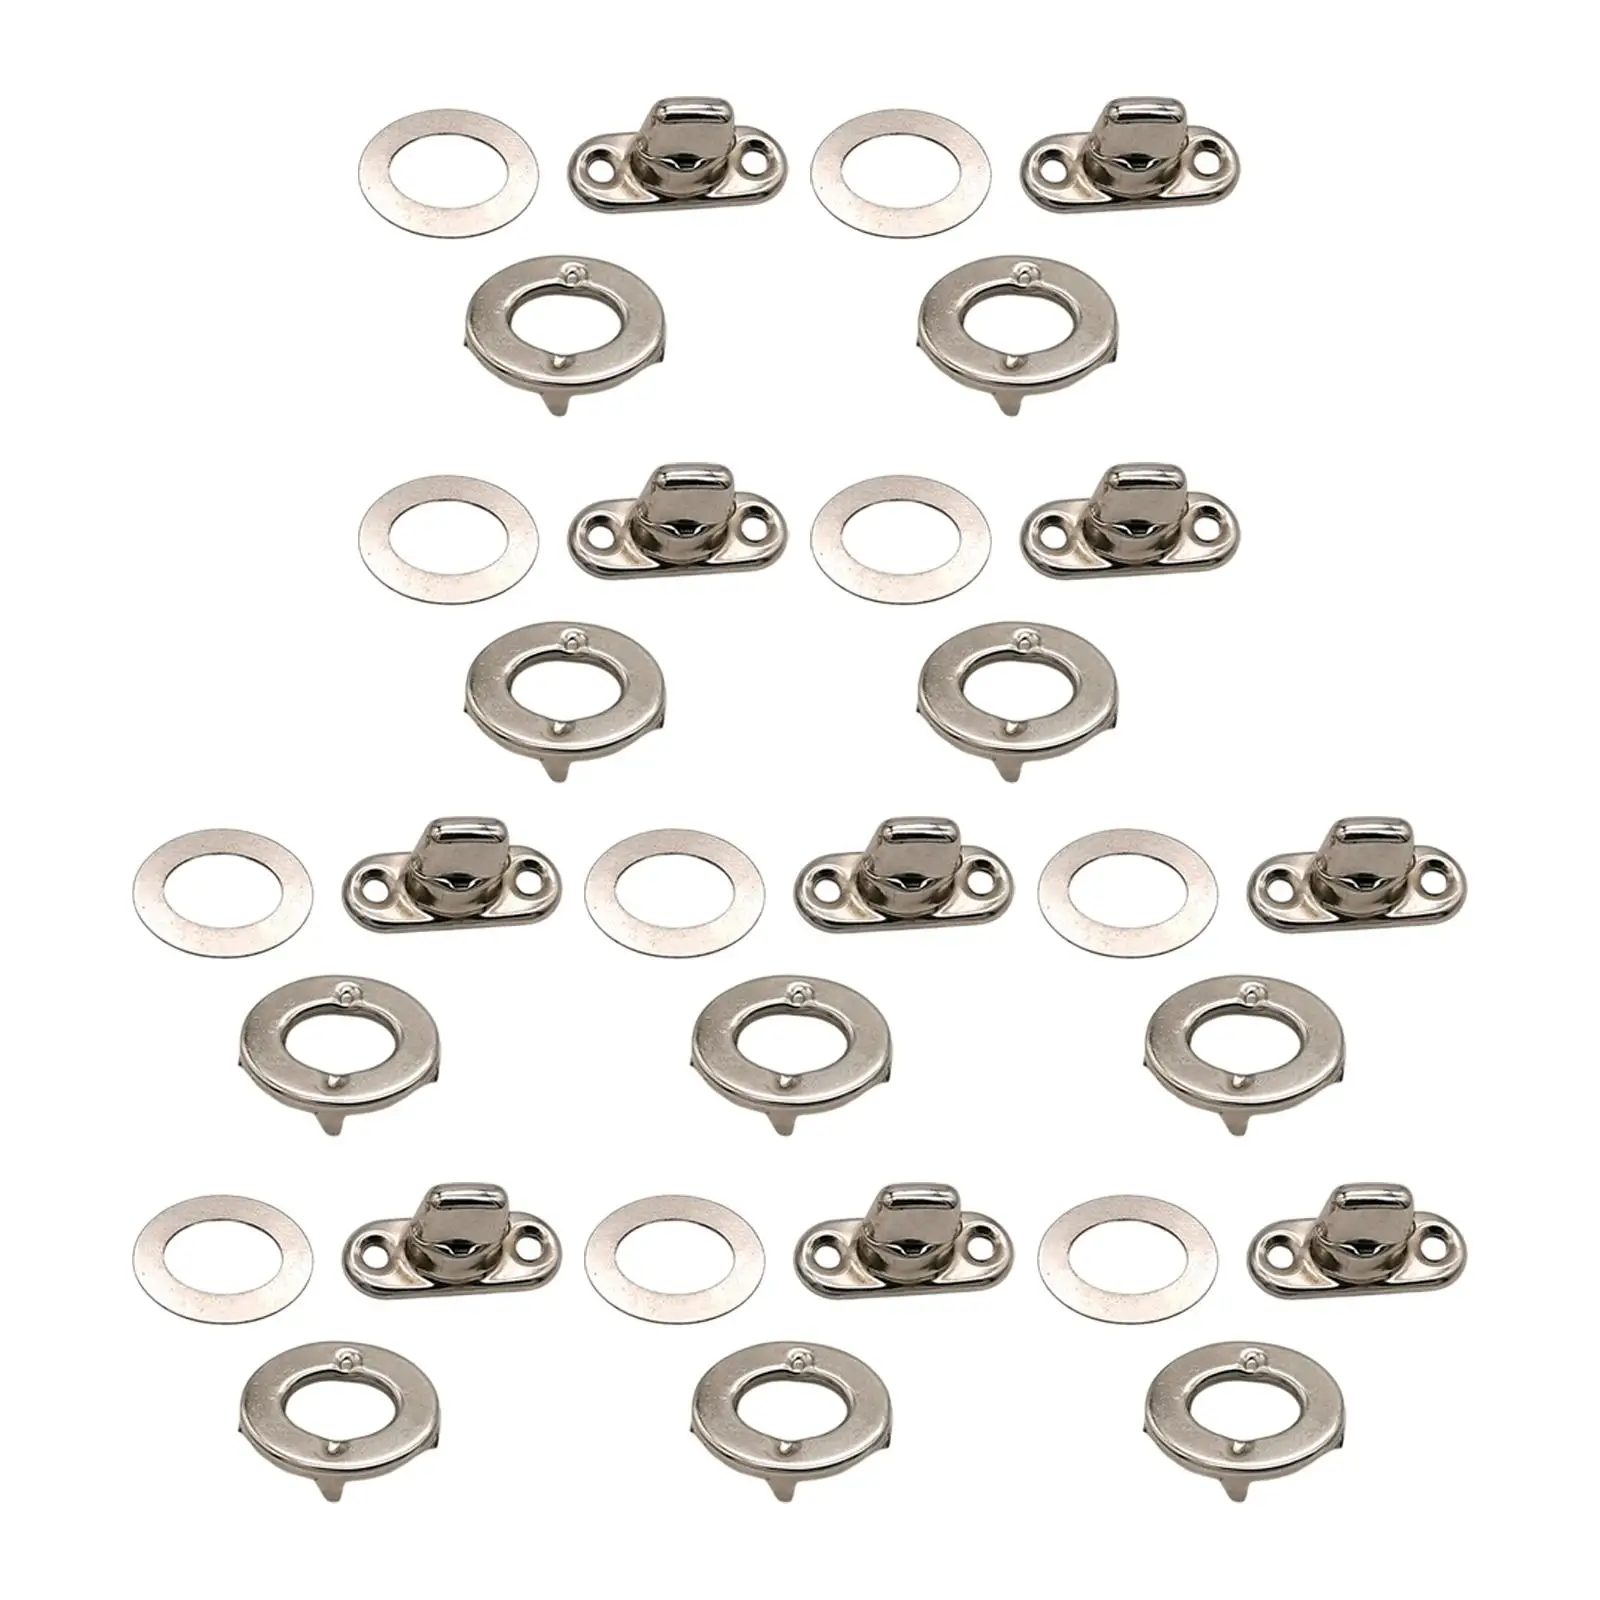 10x Smooth Rotary Lock Buckle Decorative Alloy for Luggage Craft